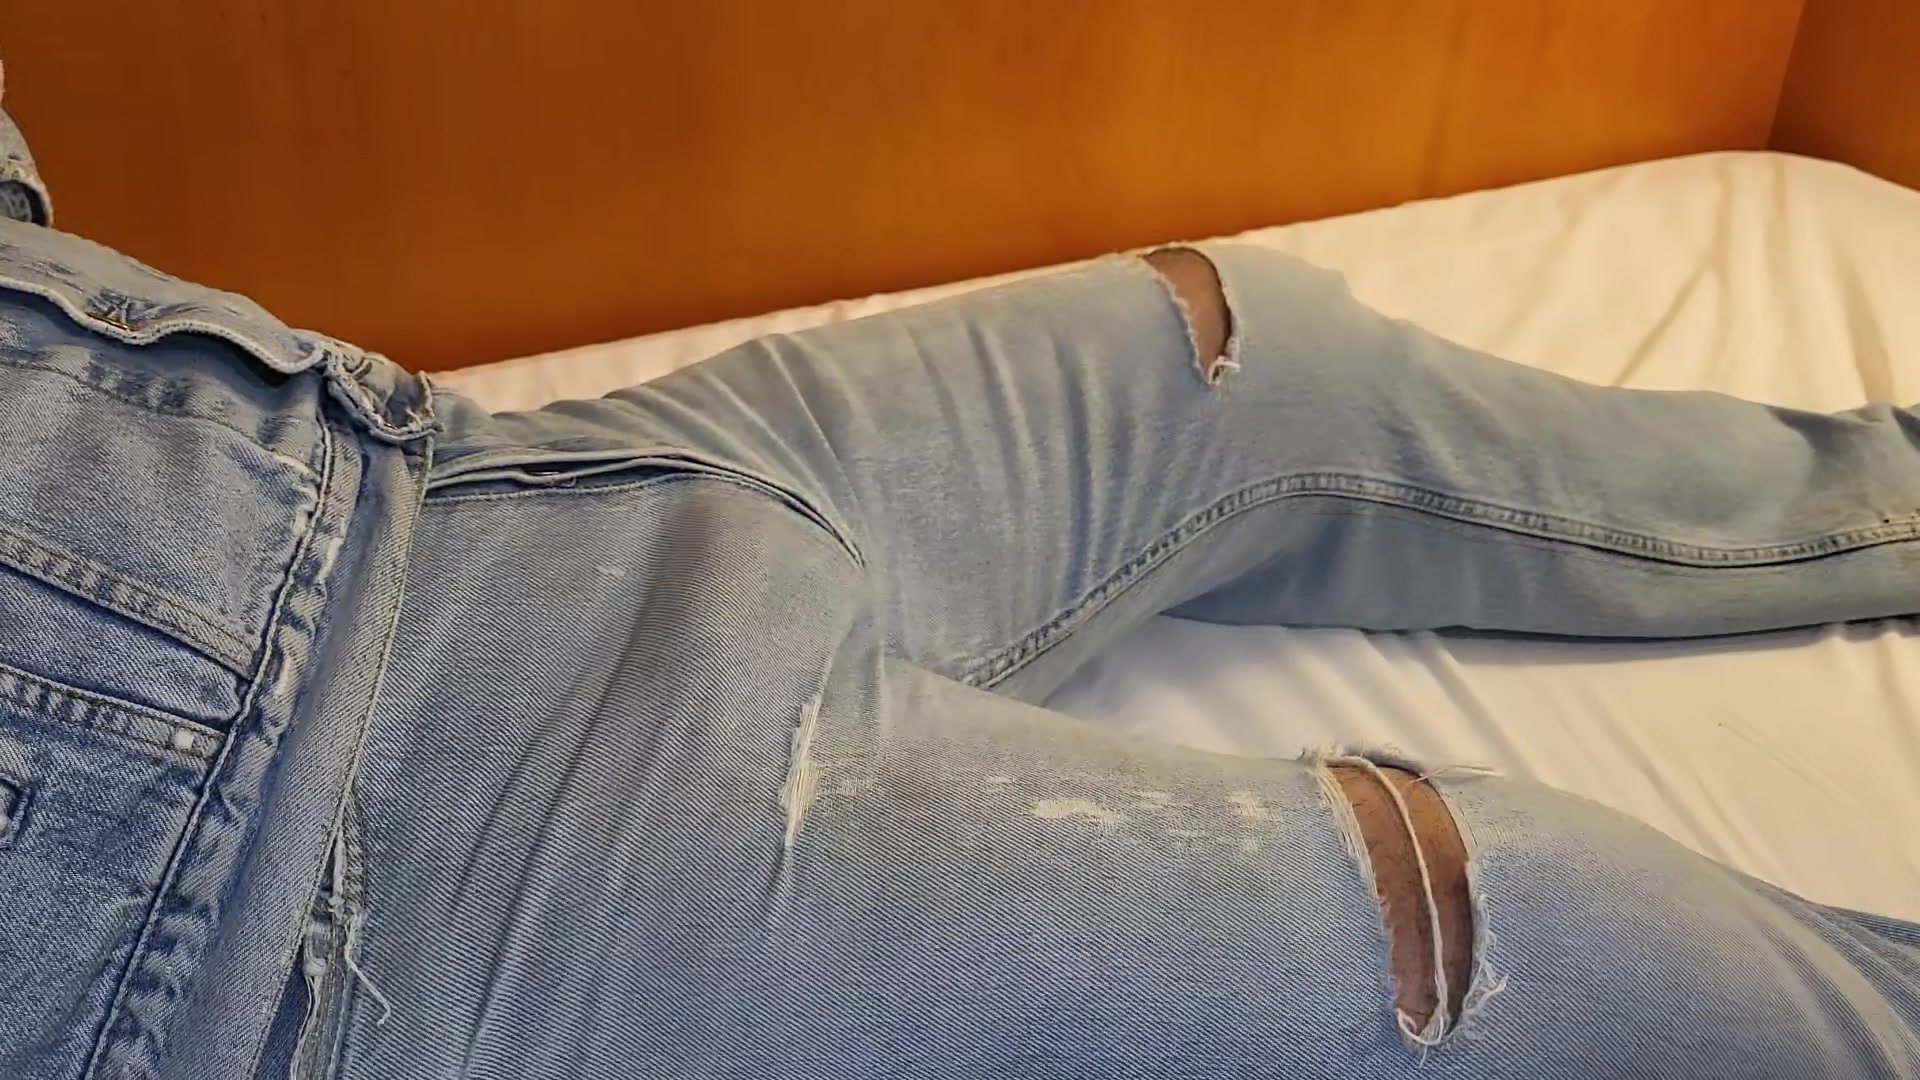 Shooting inside my ripped light blue Levis 501 jeans